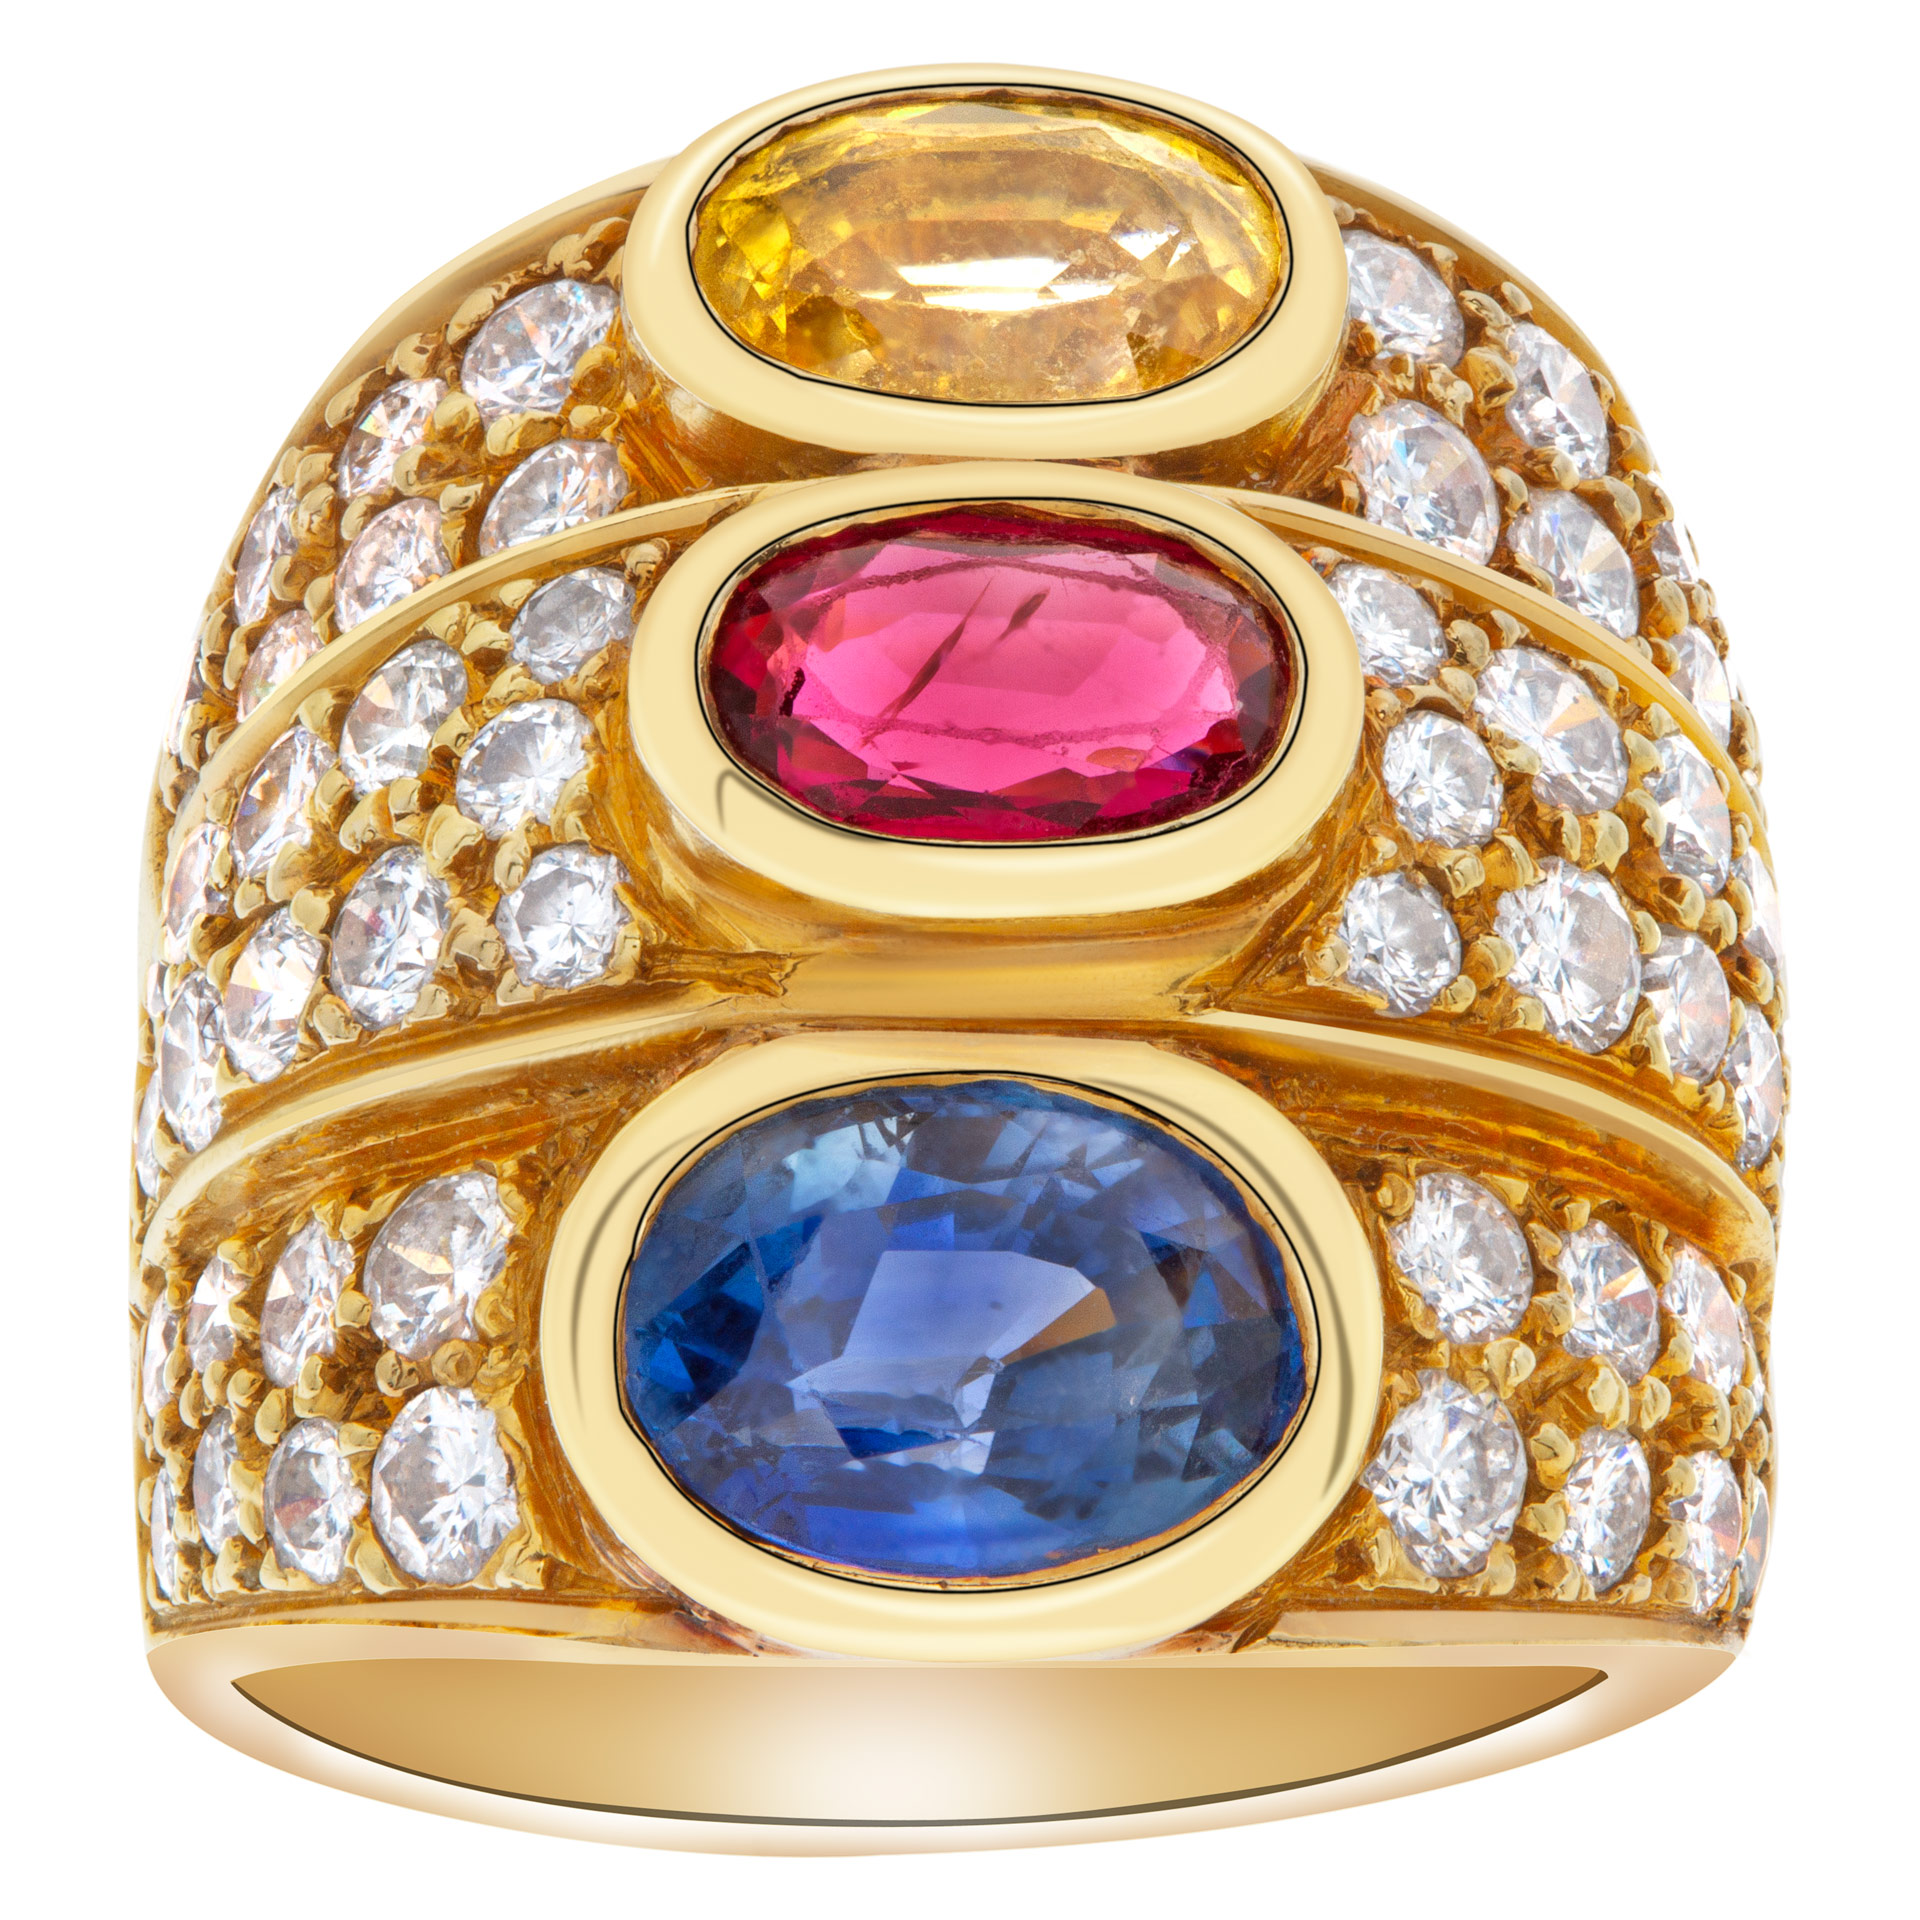 Blue sapphire, ruby and citrine ring with over 2 carats round brilliant cut diamonds, estimate: G-H